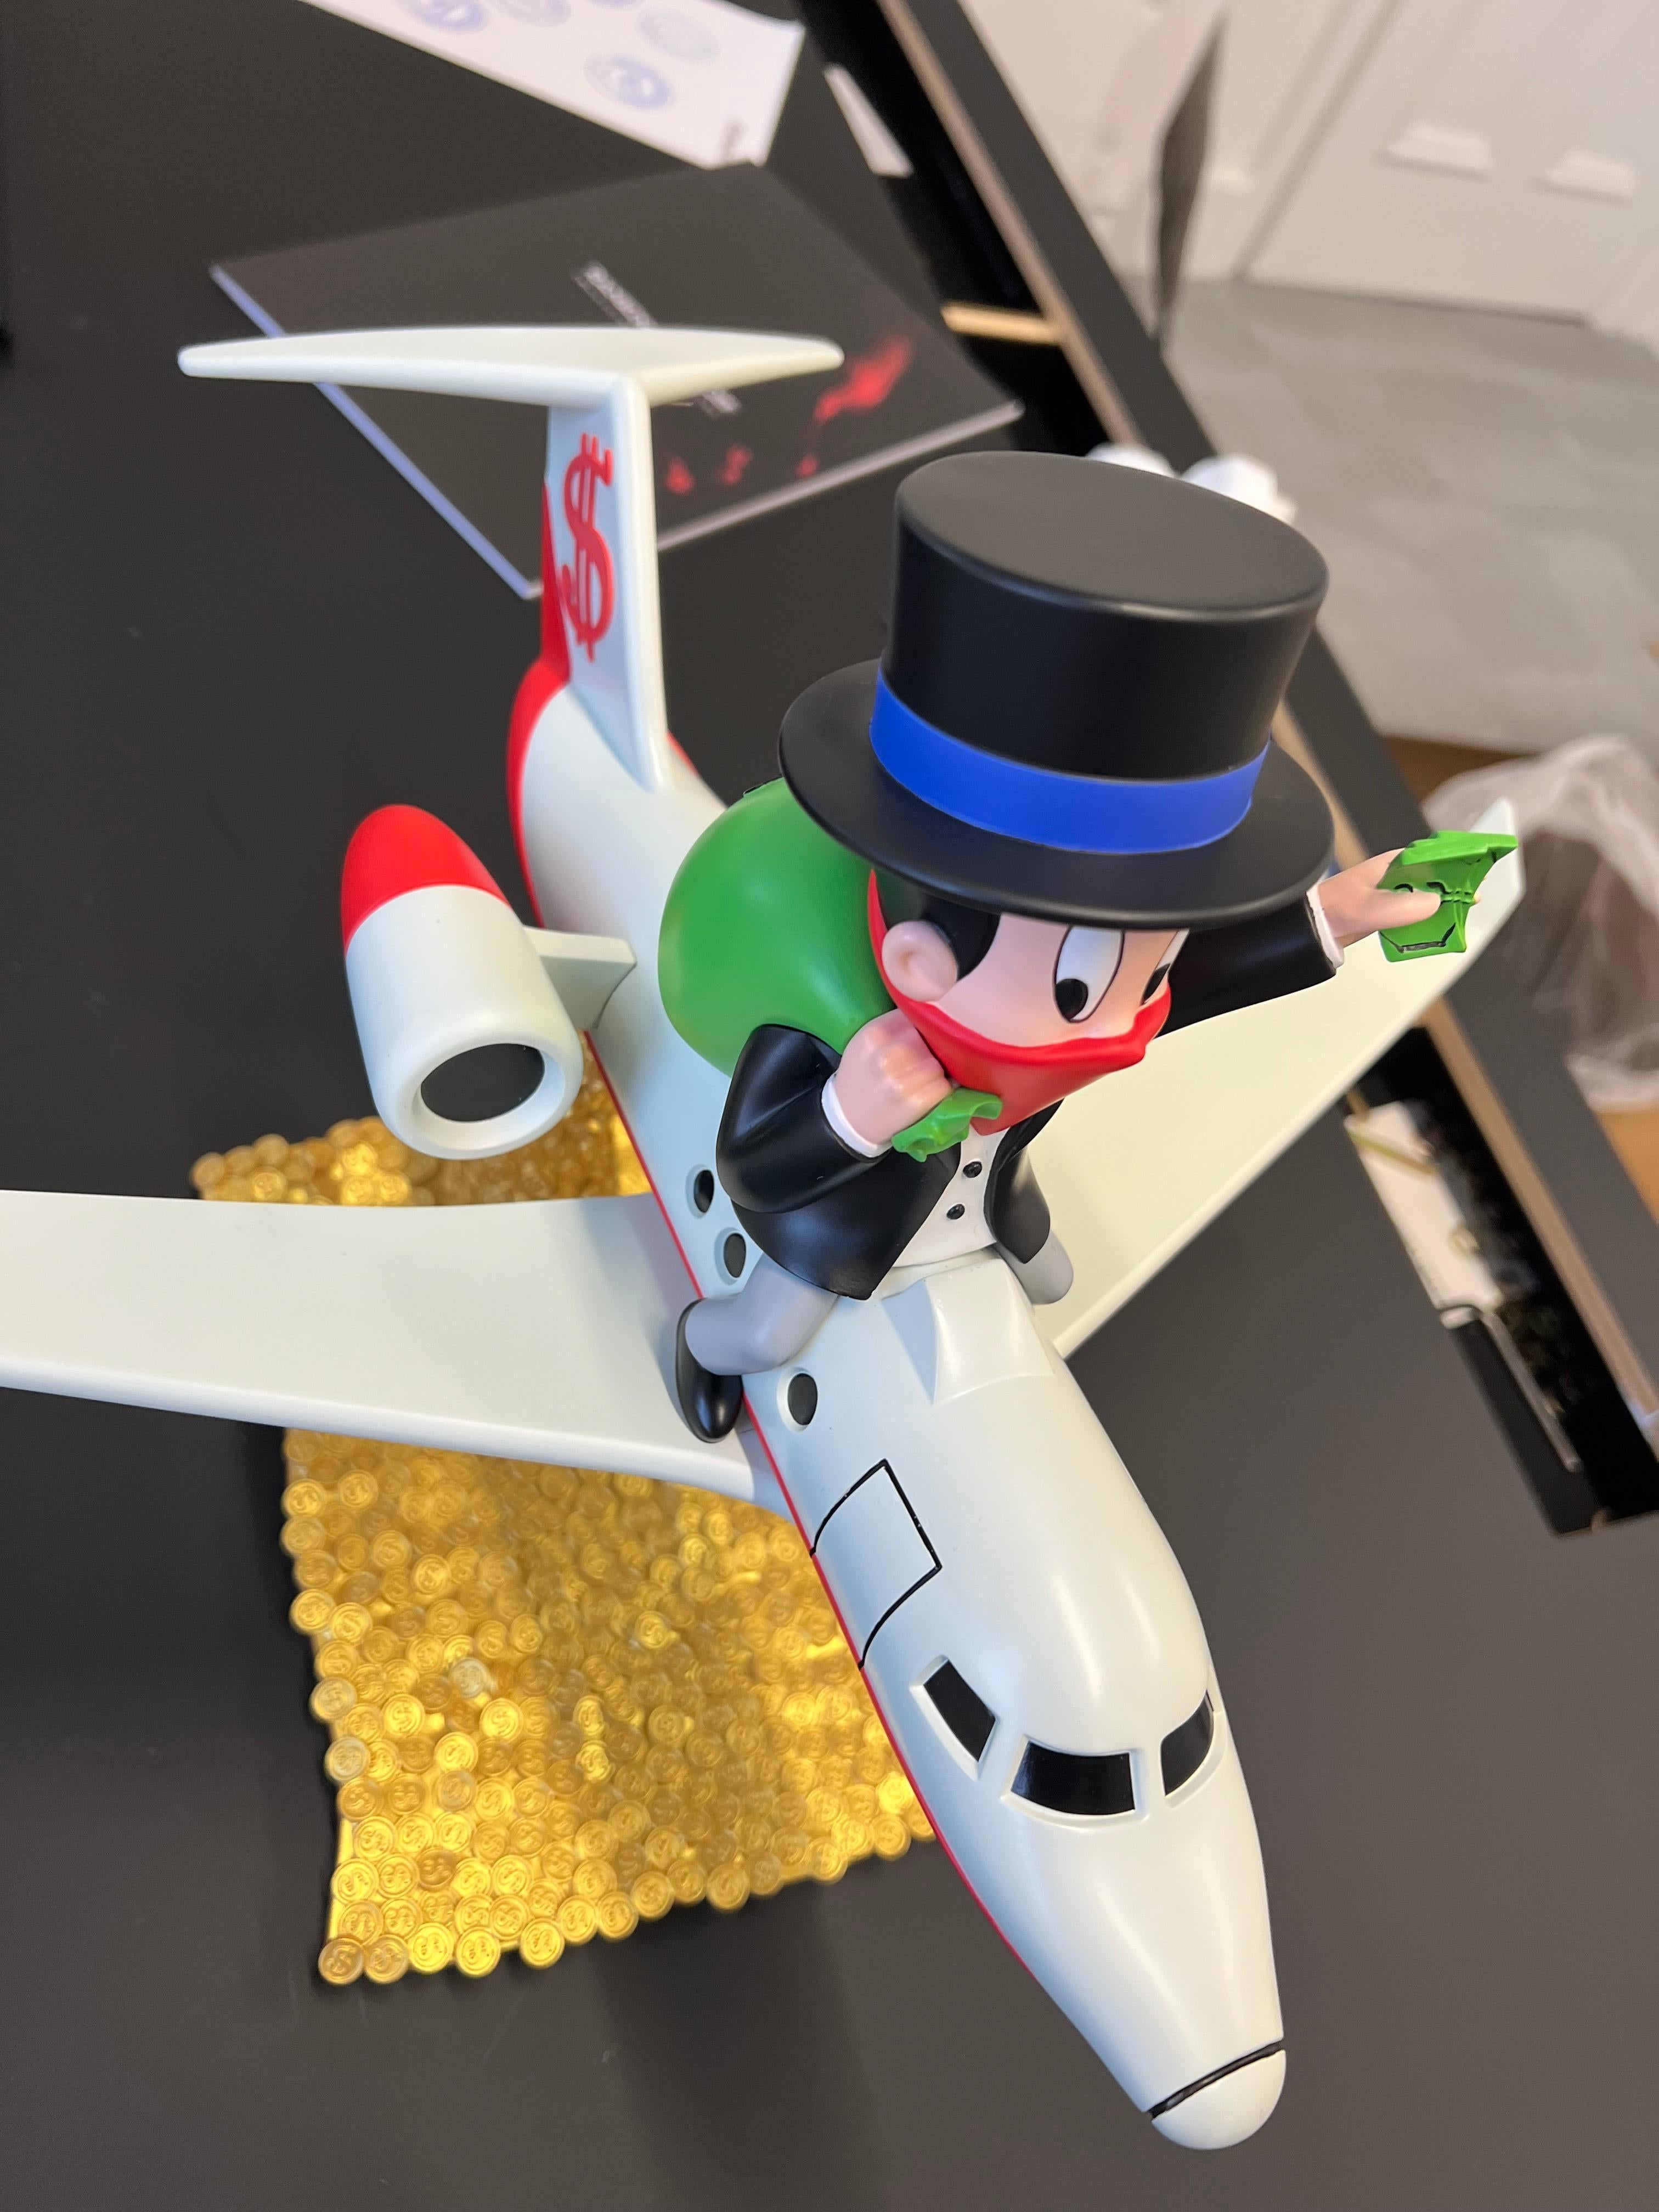 Alec Monopoly
Rich Airways, 2021
Sculpture, Painted Cast Vinyl
18 × 14 in  45.7 × 35.6 cm
Edition of 250

In his murals, cavanses, and prints, Alec Monopoly (born Alec Andon) invites his viewers to simultaneously critique and buy into ideas of